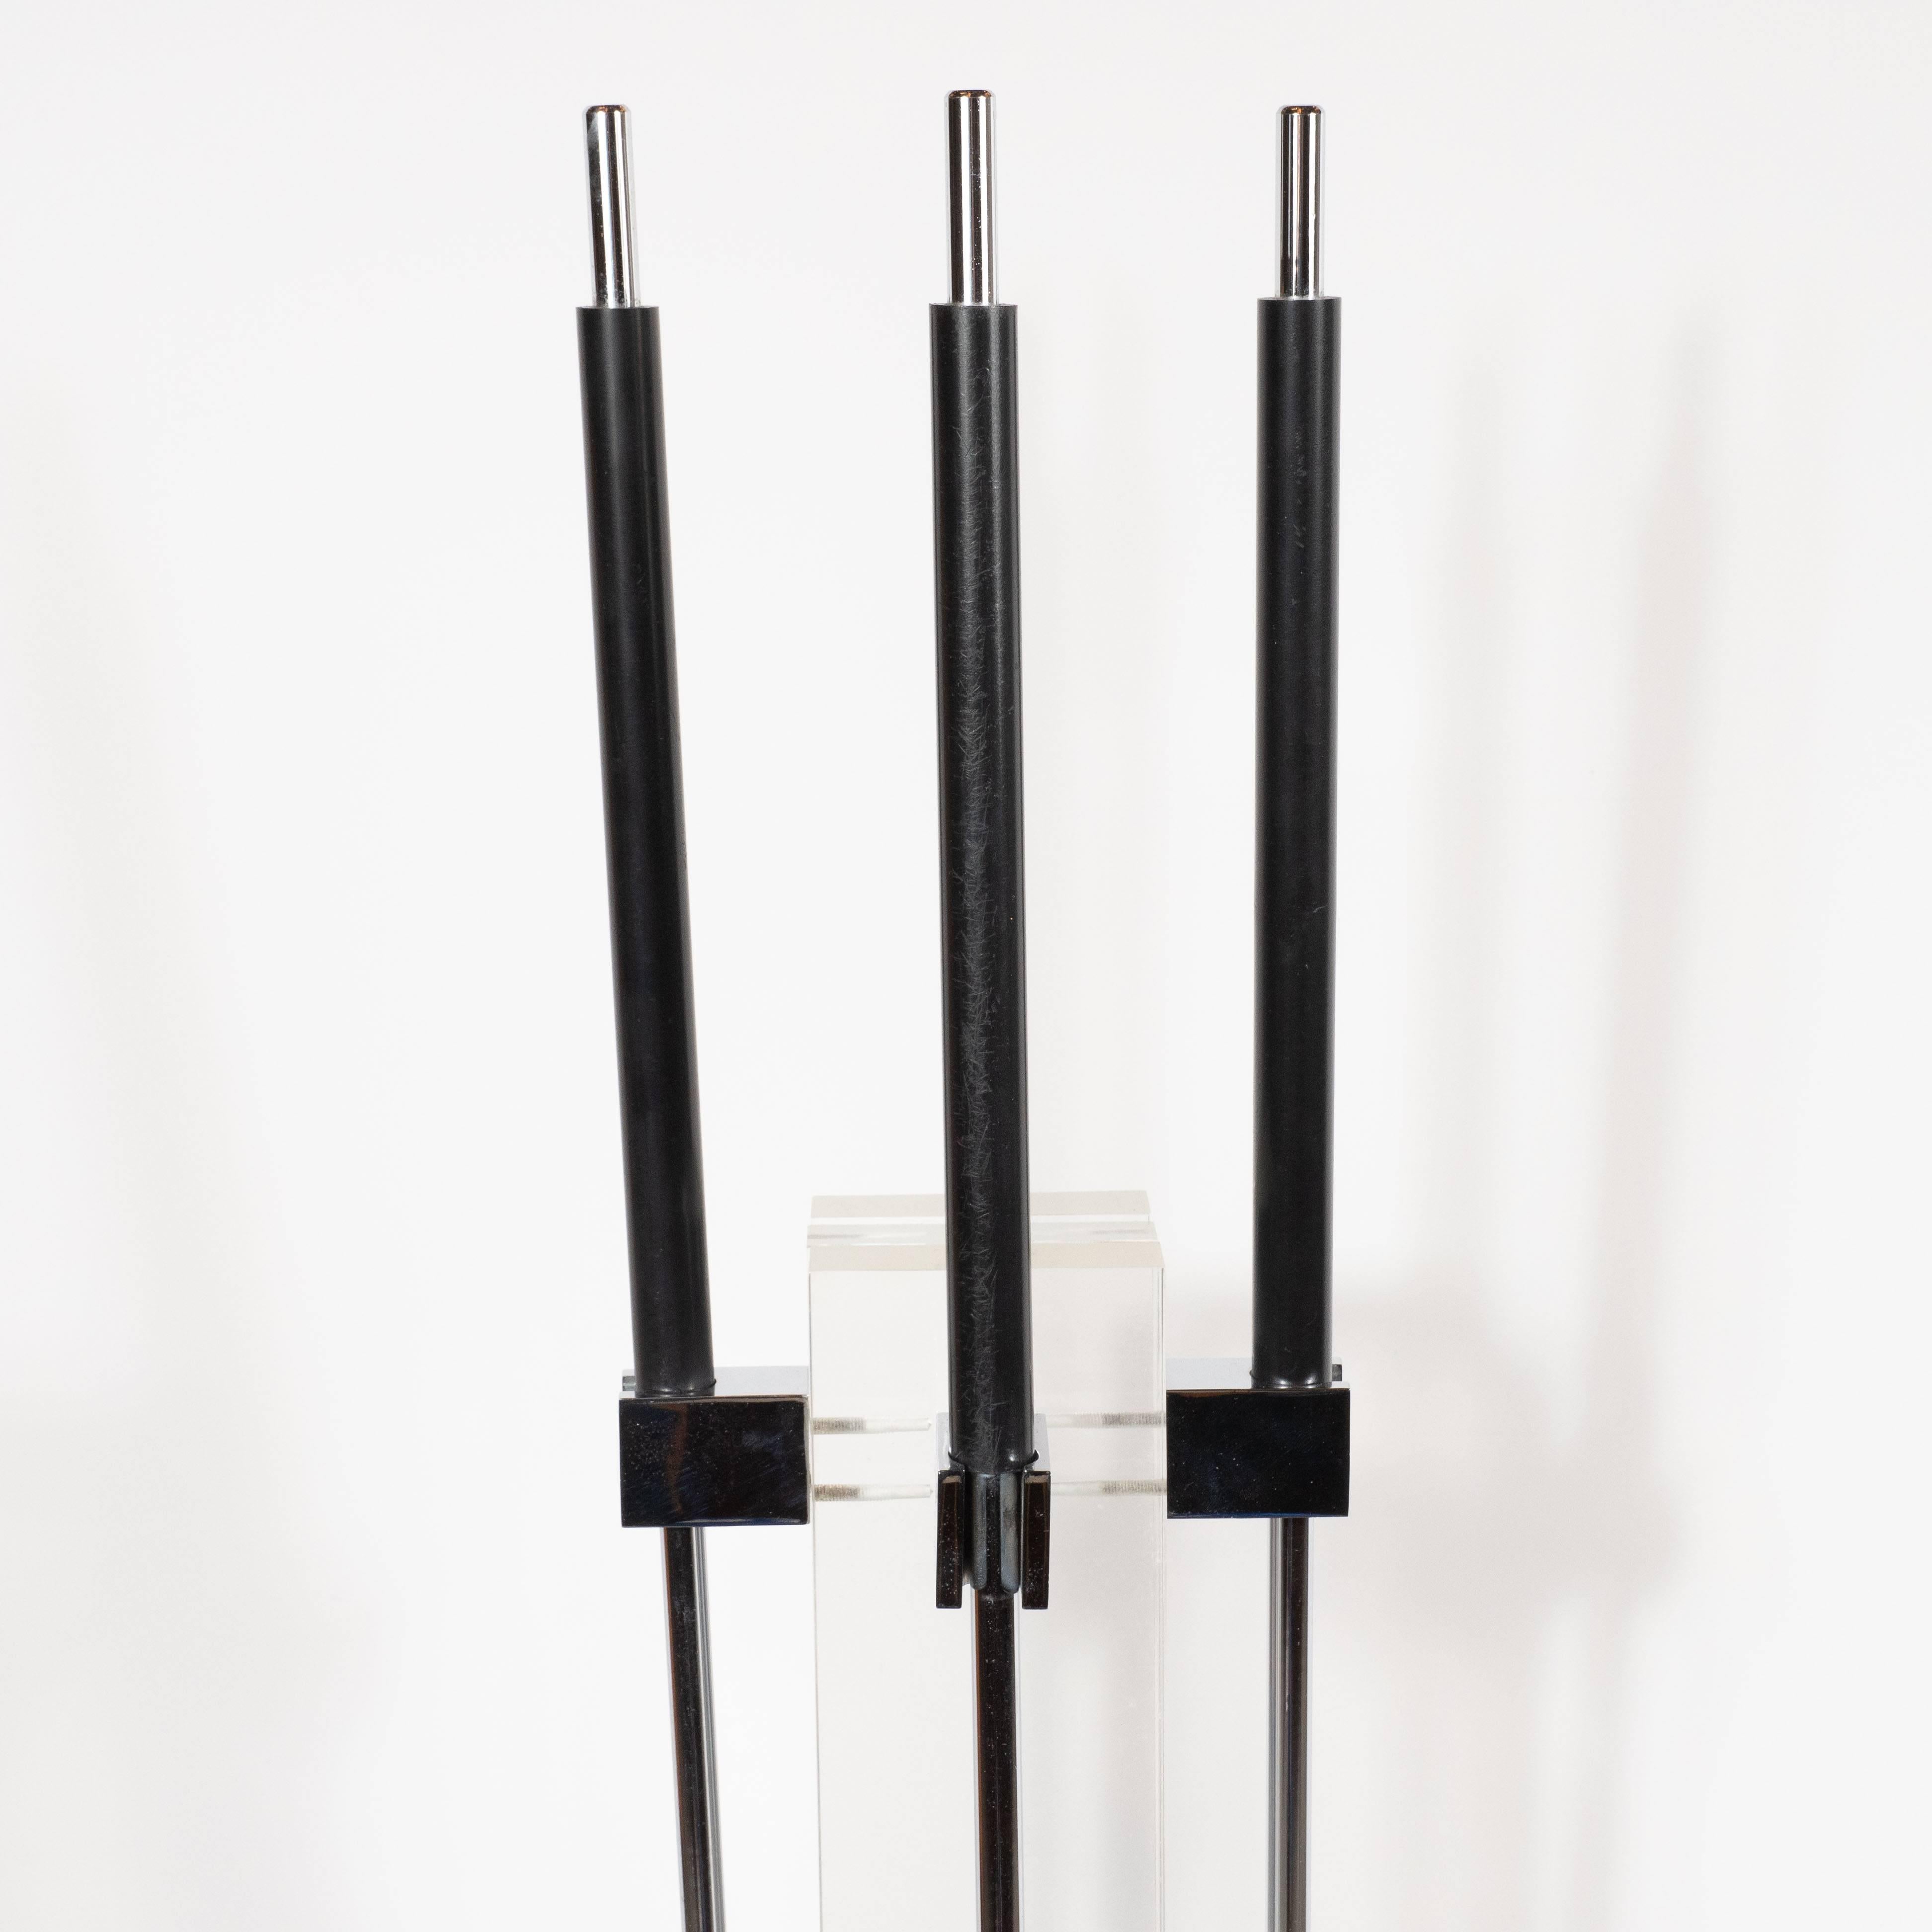 This refined fireplace tool set was realized by the esteemed Mid-Century Modern designer Alessandro Albrizzi, in Italy, circa 1970. The set includes a poker, shovel, brush and stand. The stand is composed of three rectangular slabs of Lucite resting